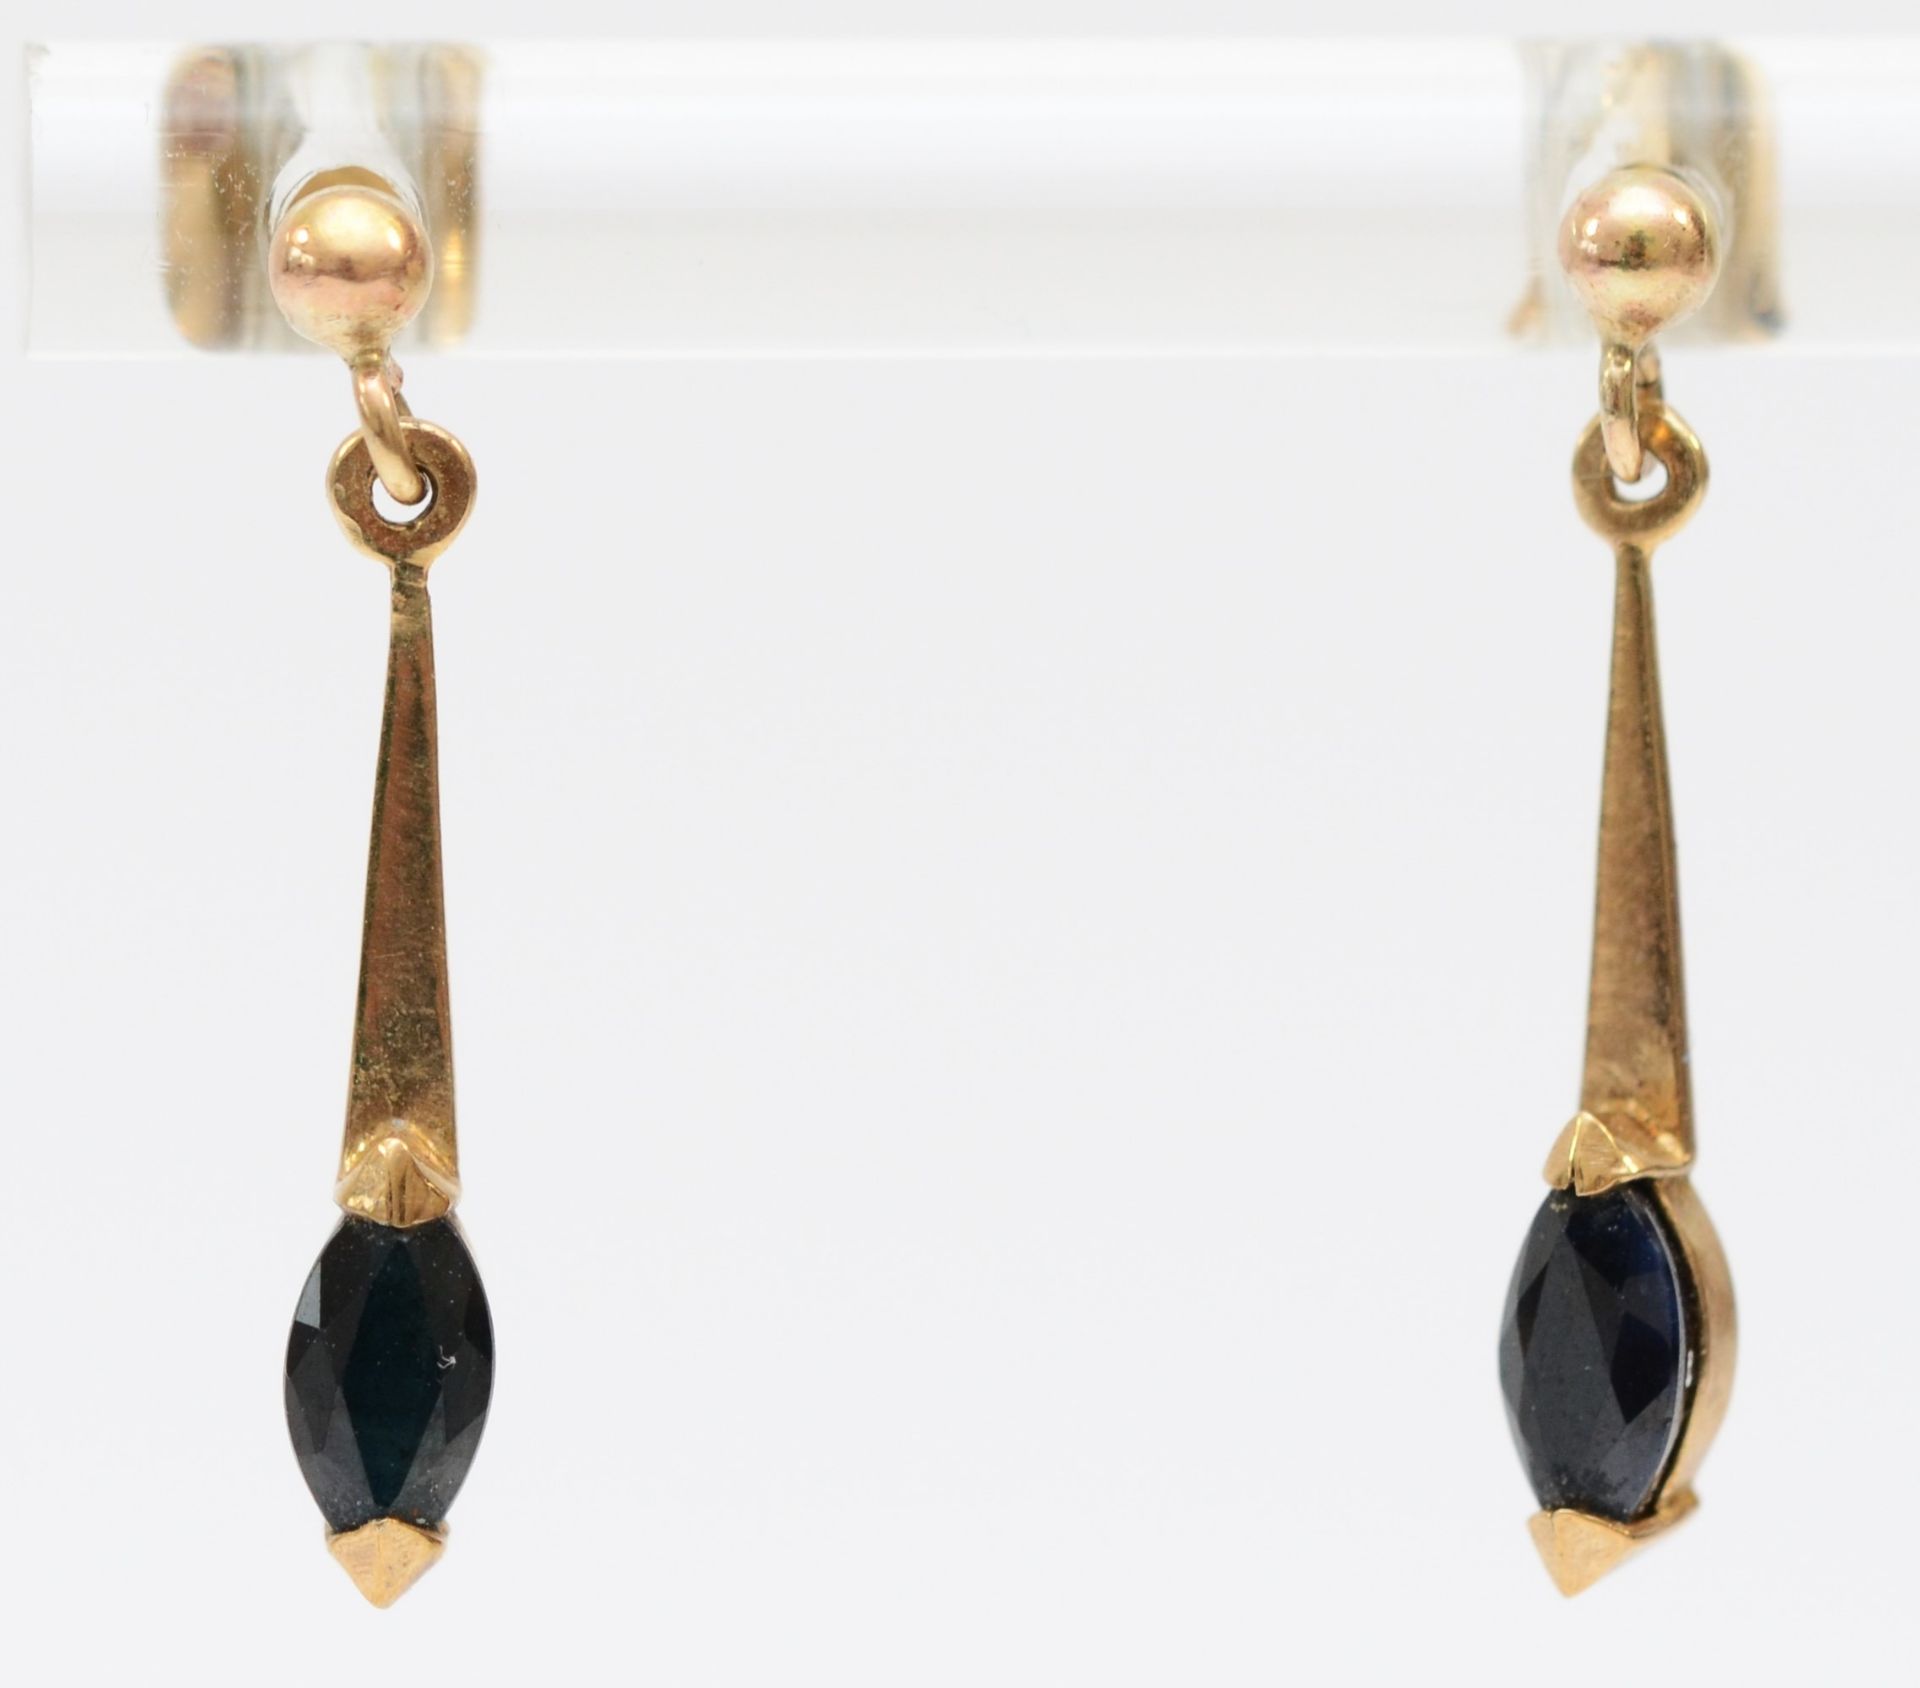 A 9ct gold pair of sapphire ear pendants, 16mm, 0.8gm